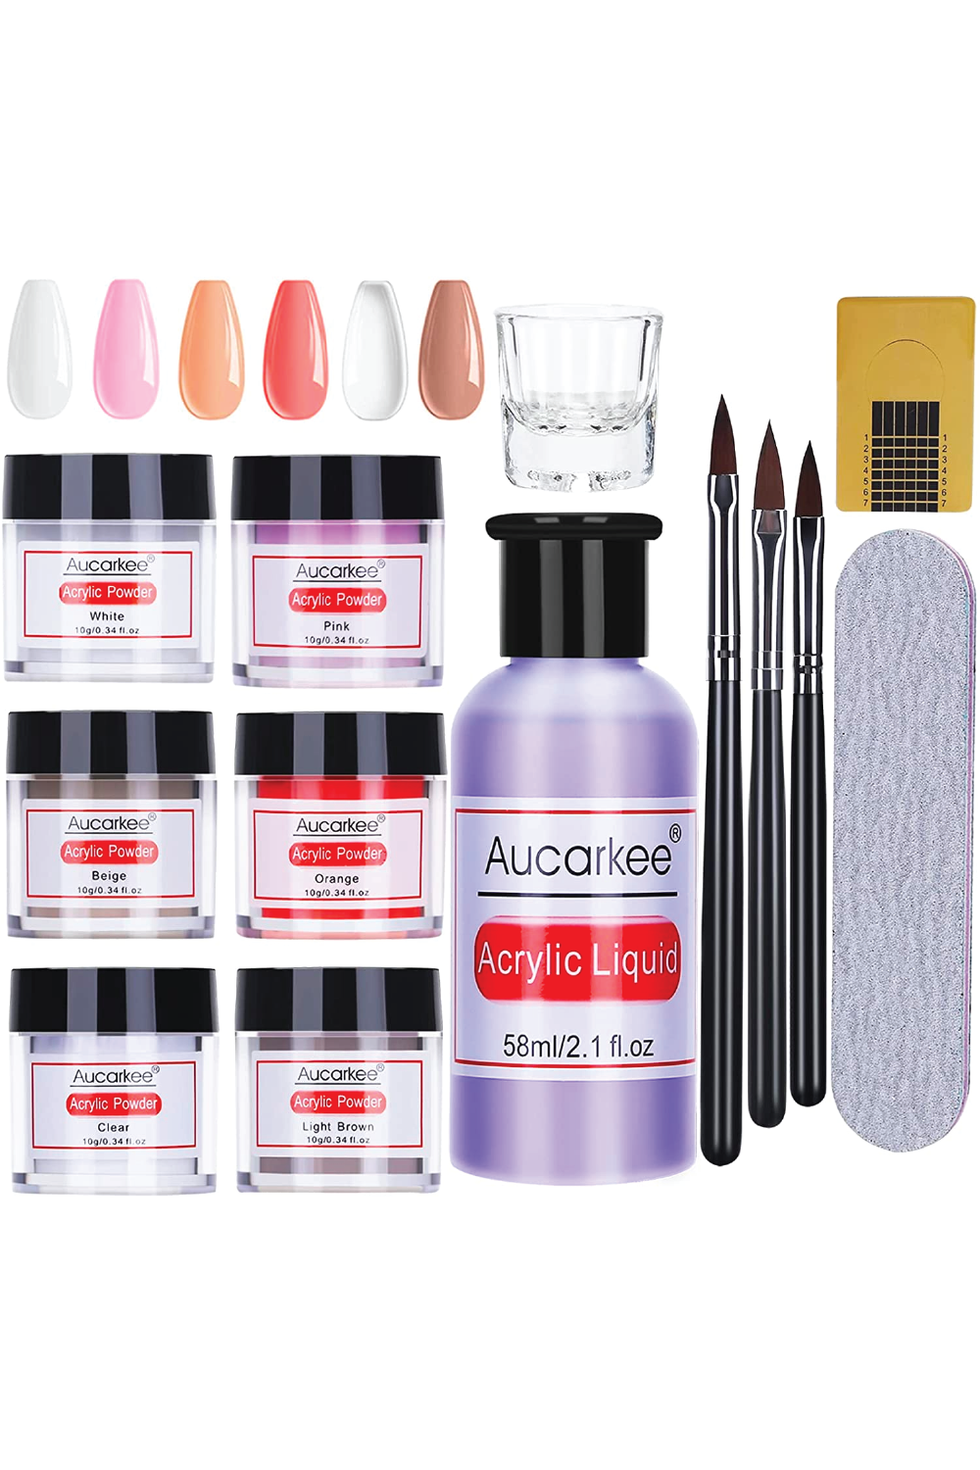 12 Best Acrylic Nail Sets for DIY Manicures 2022